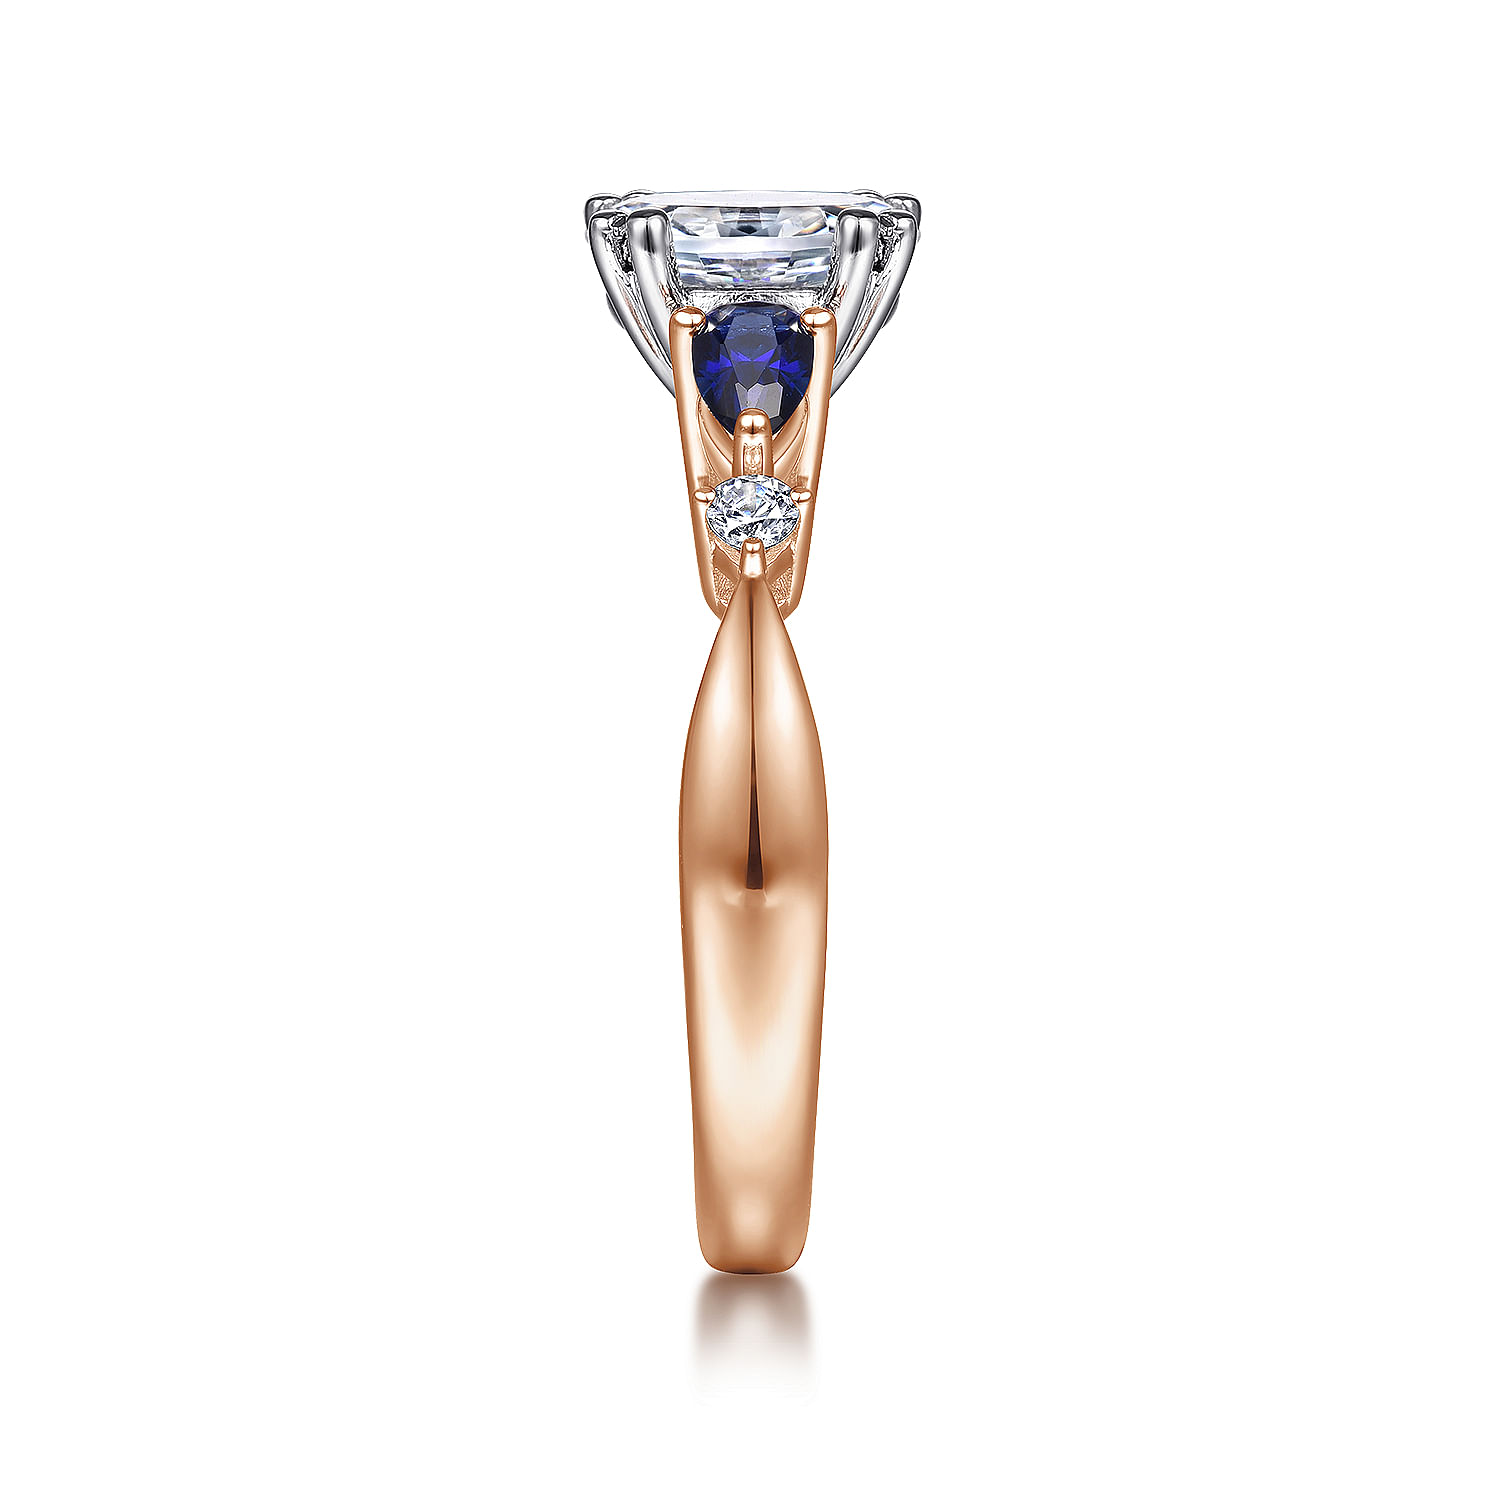 14K White-Rose Gold Oval Five Stone Sapphire and Diamond Engagement Ring